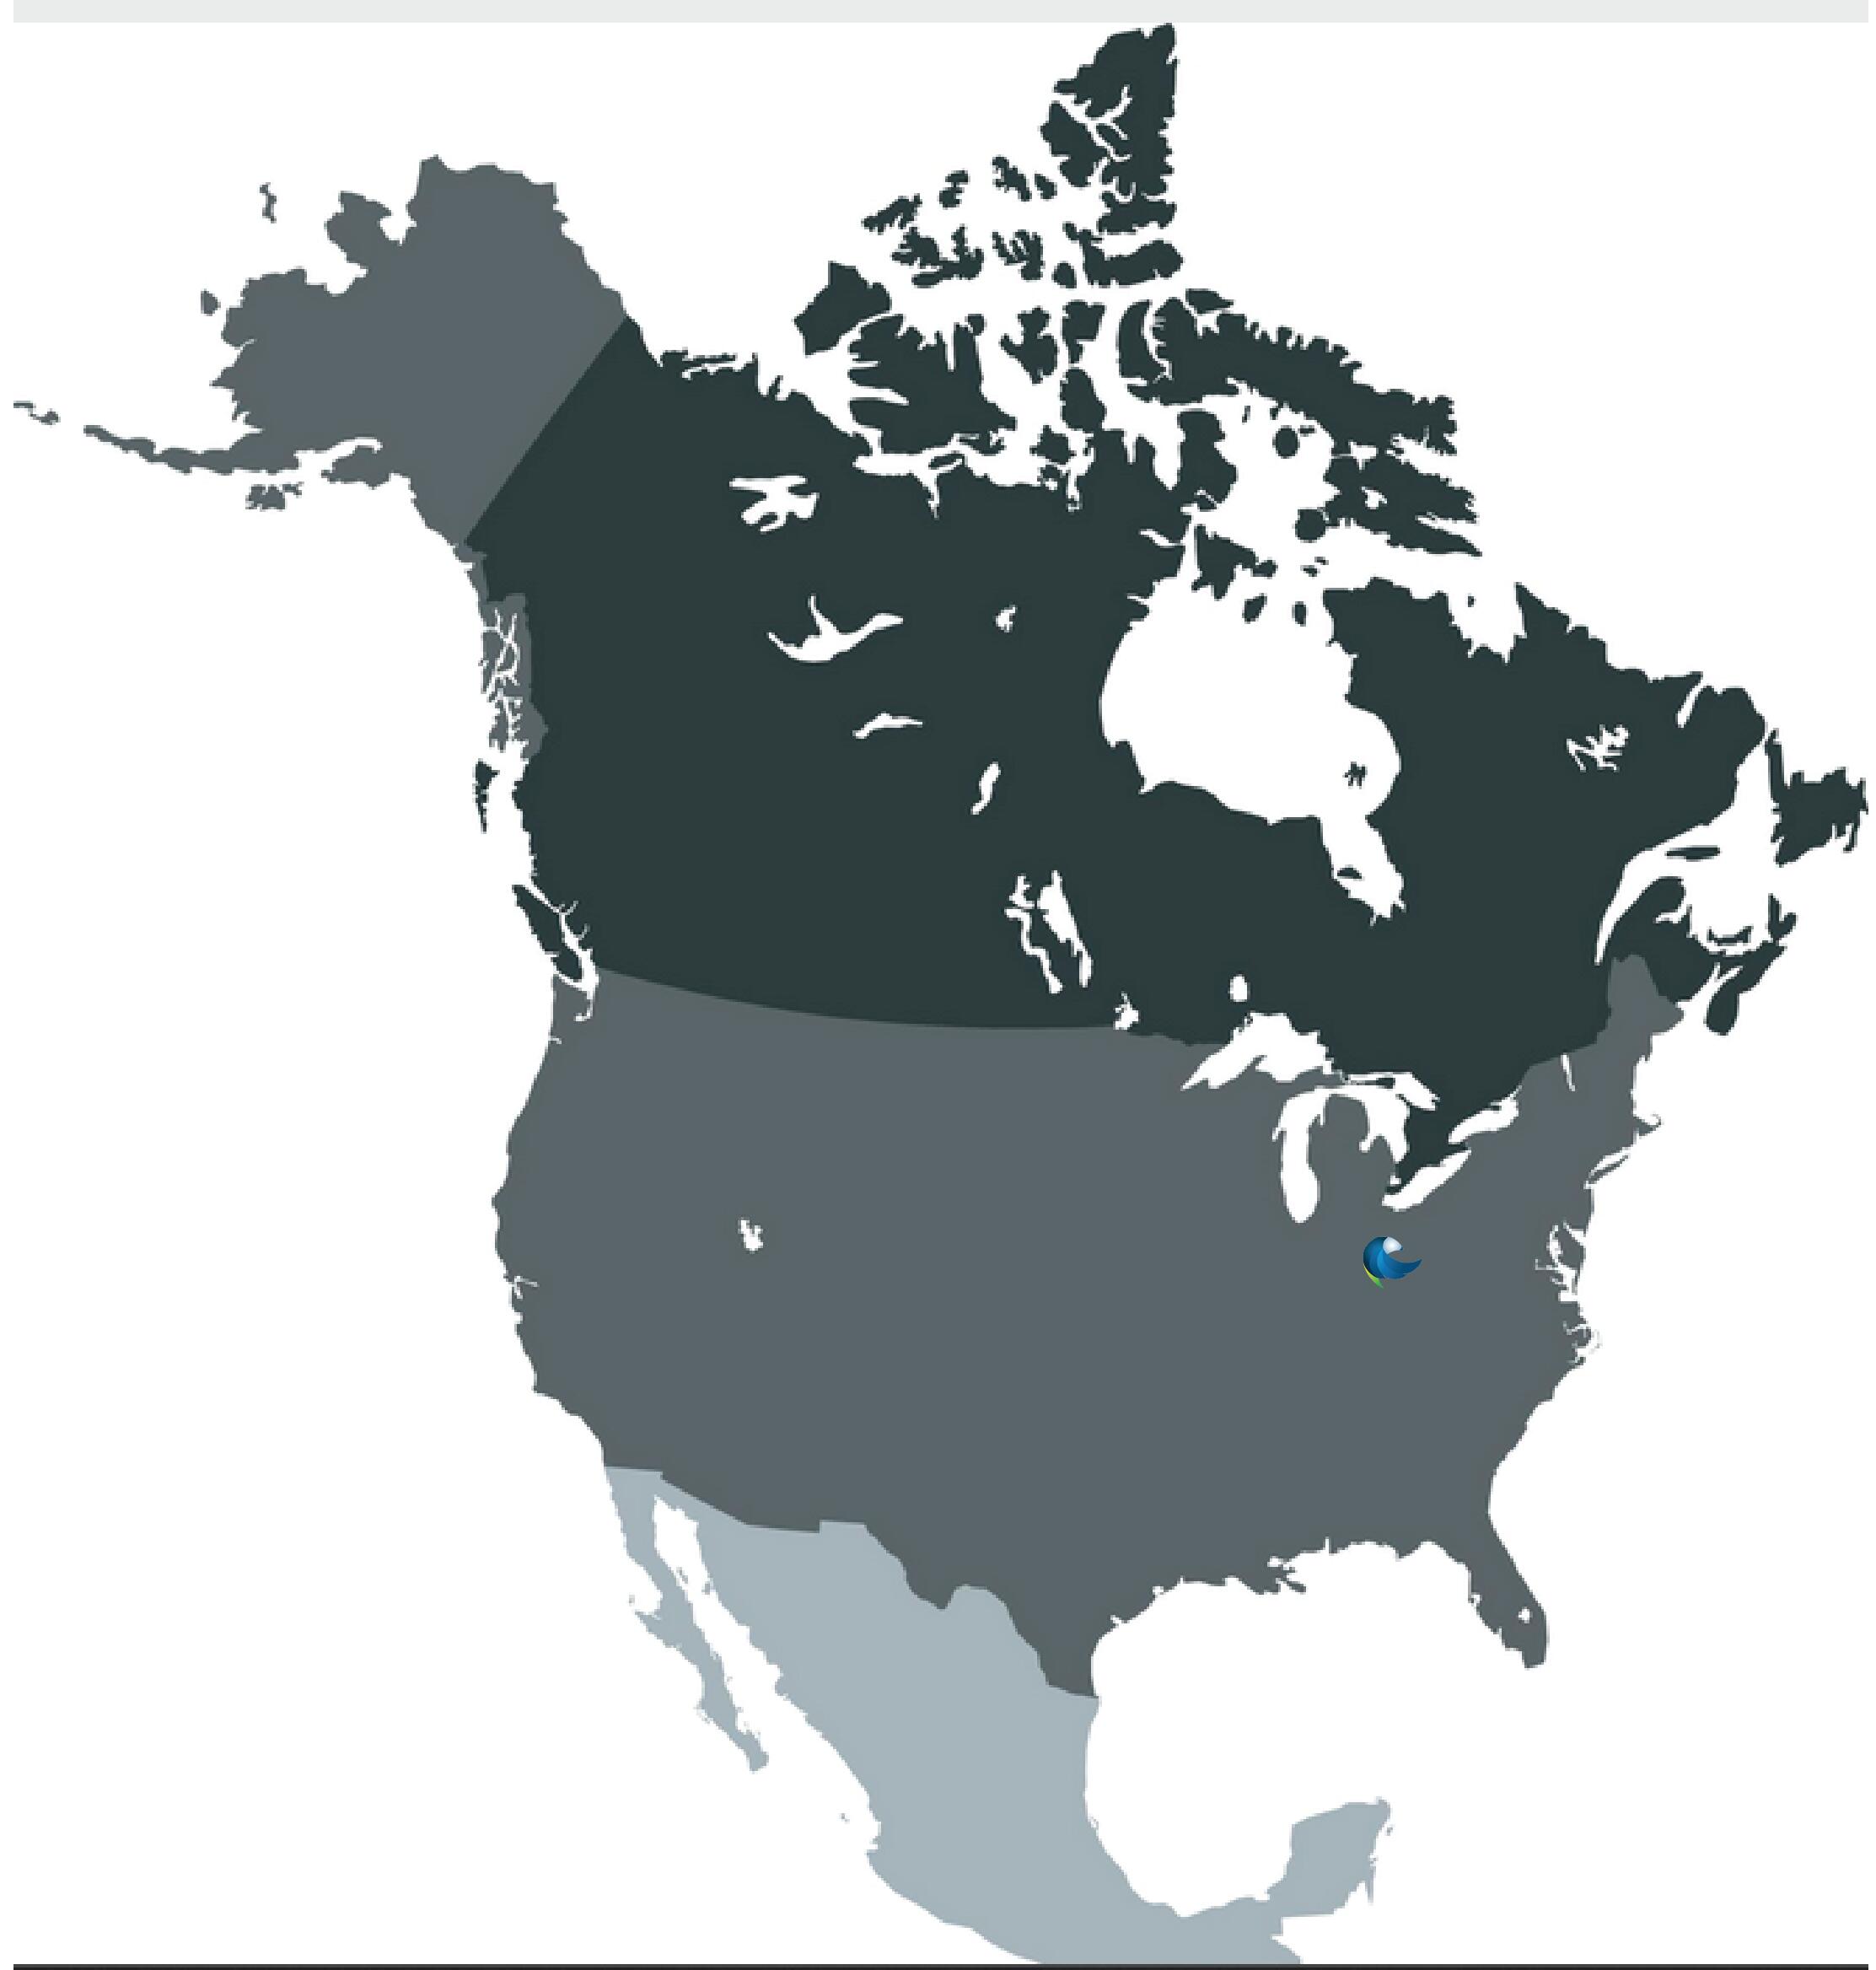 Map of Canada, the United States, and Mexico